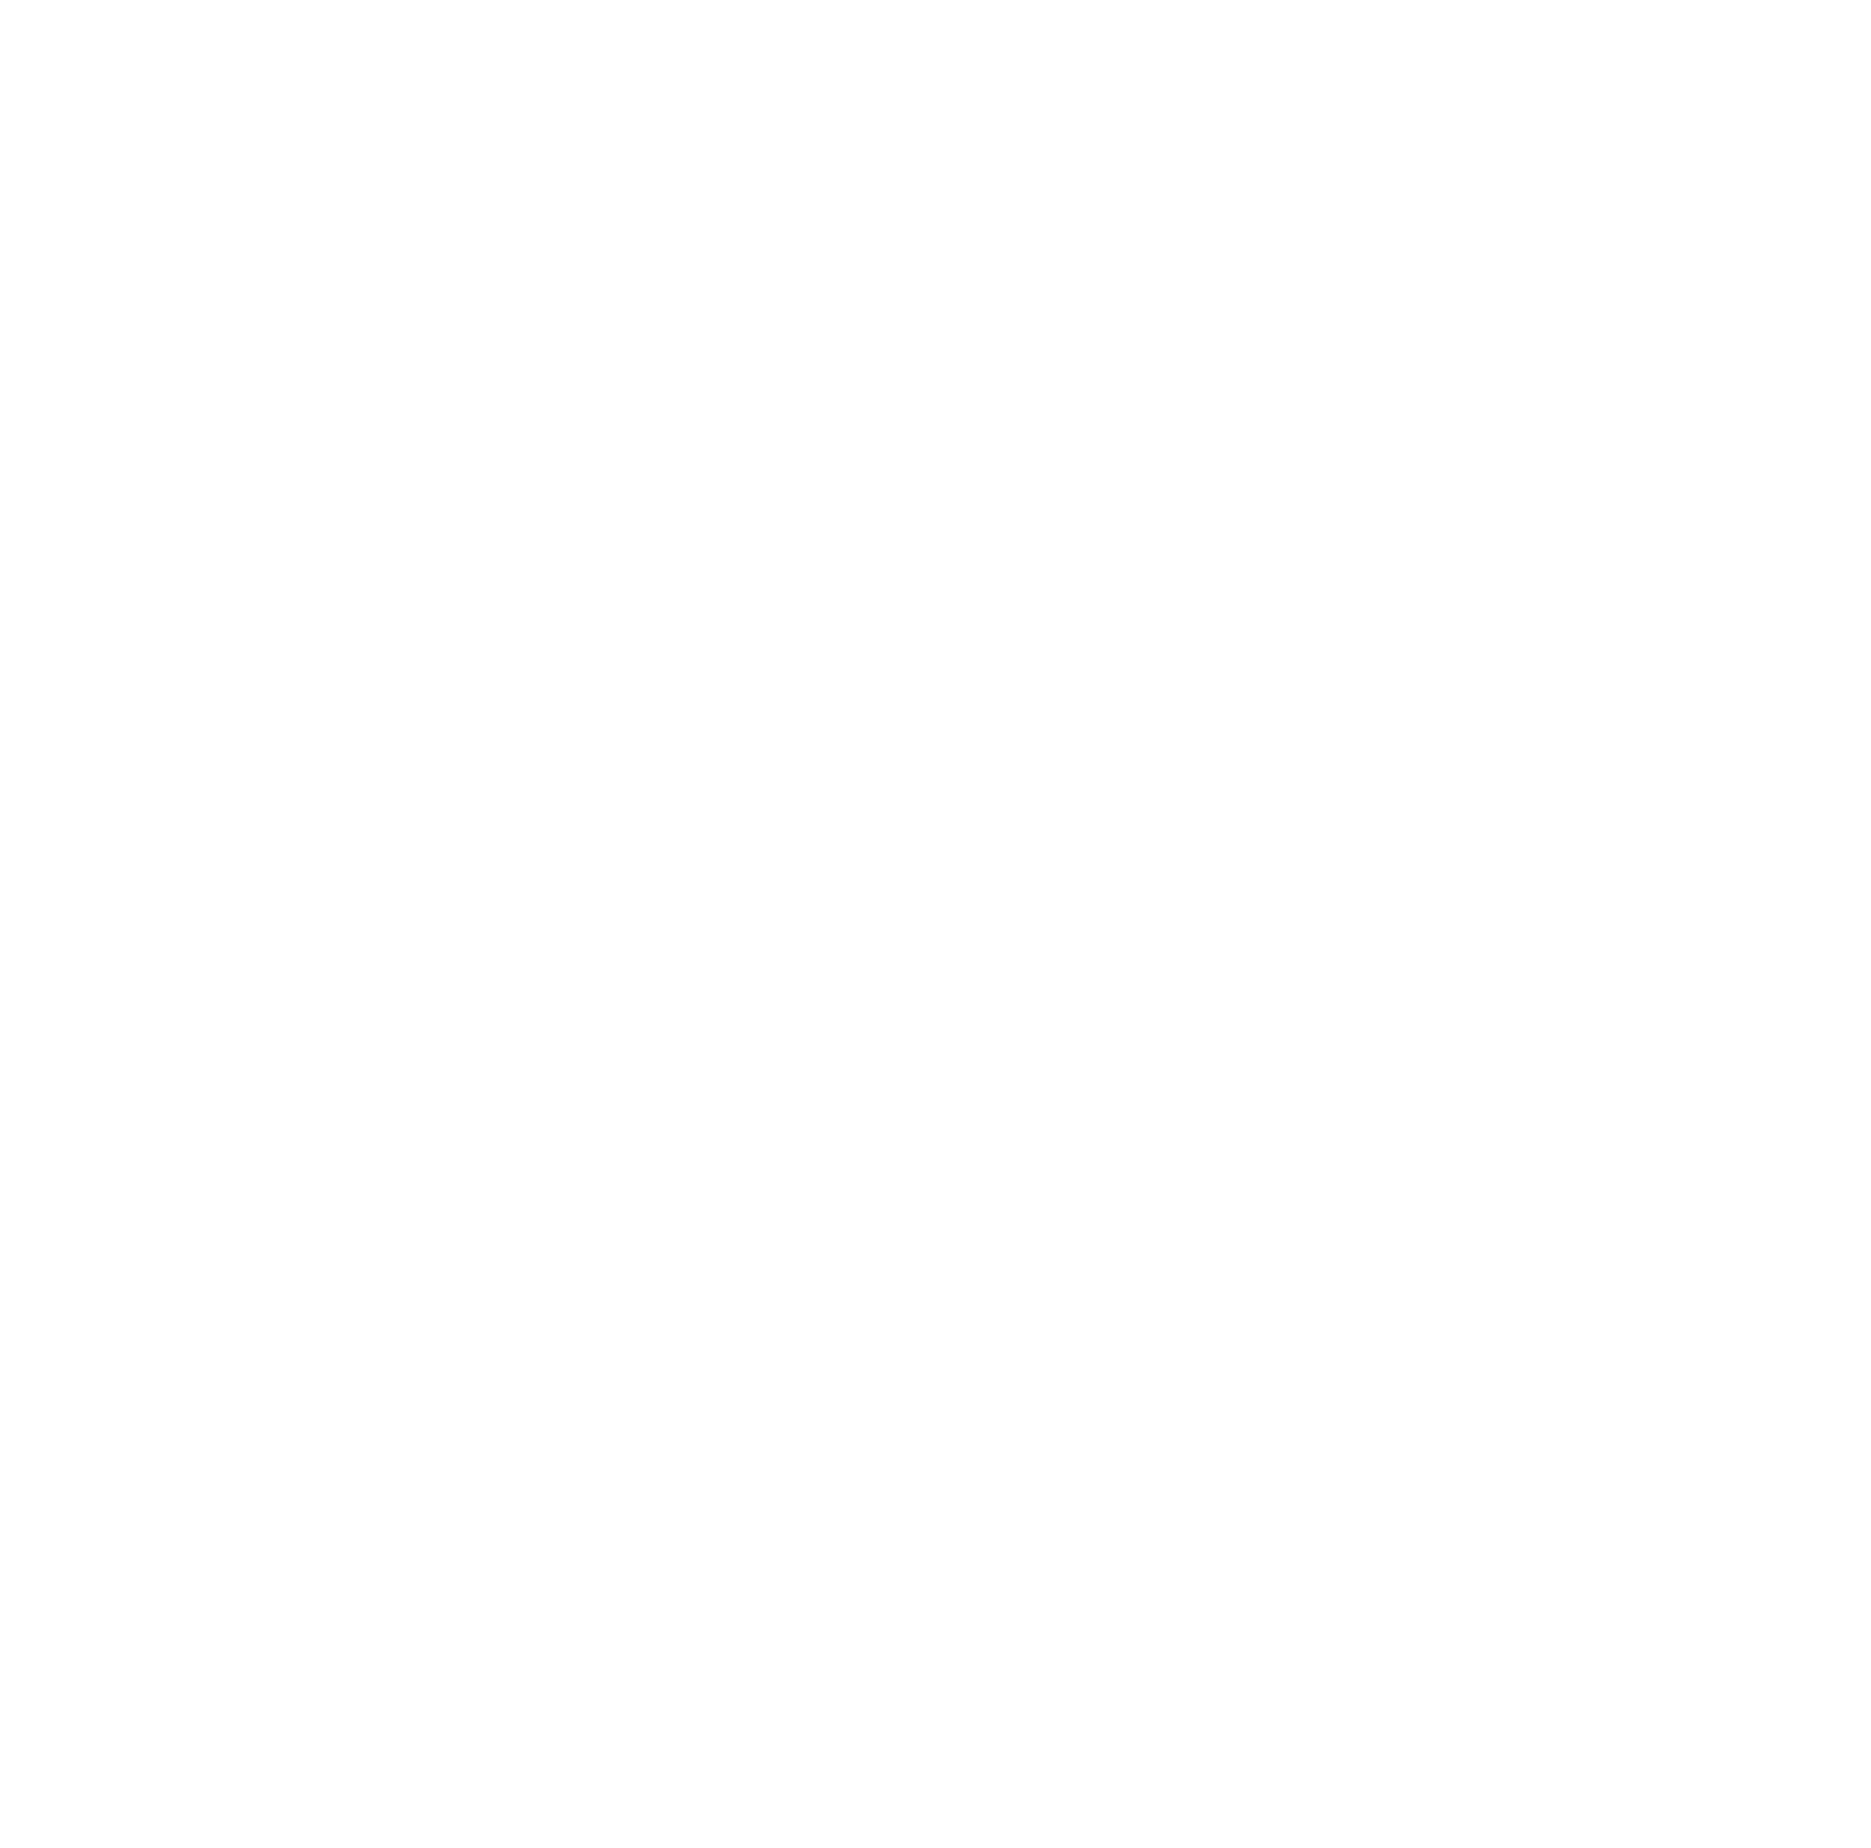 DLeeImagery